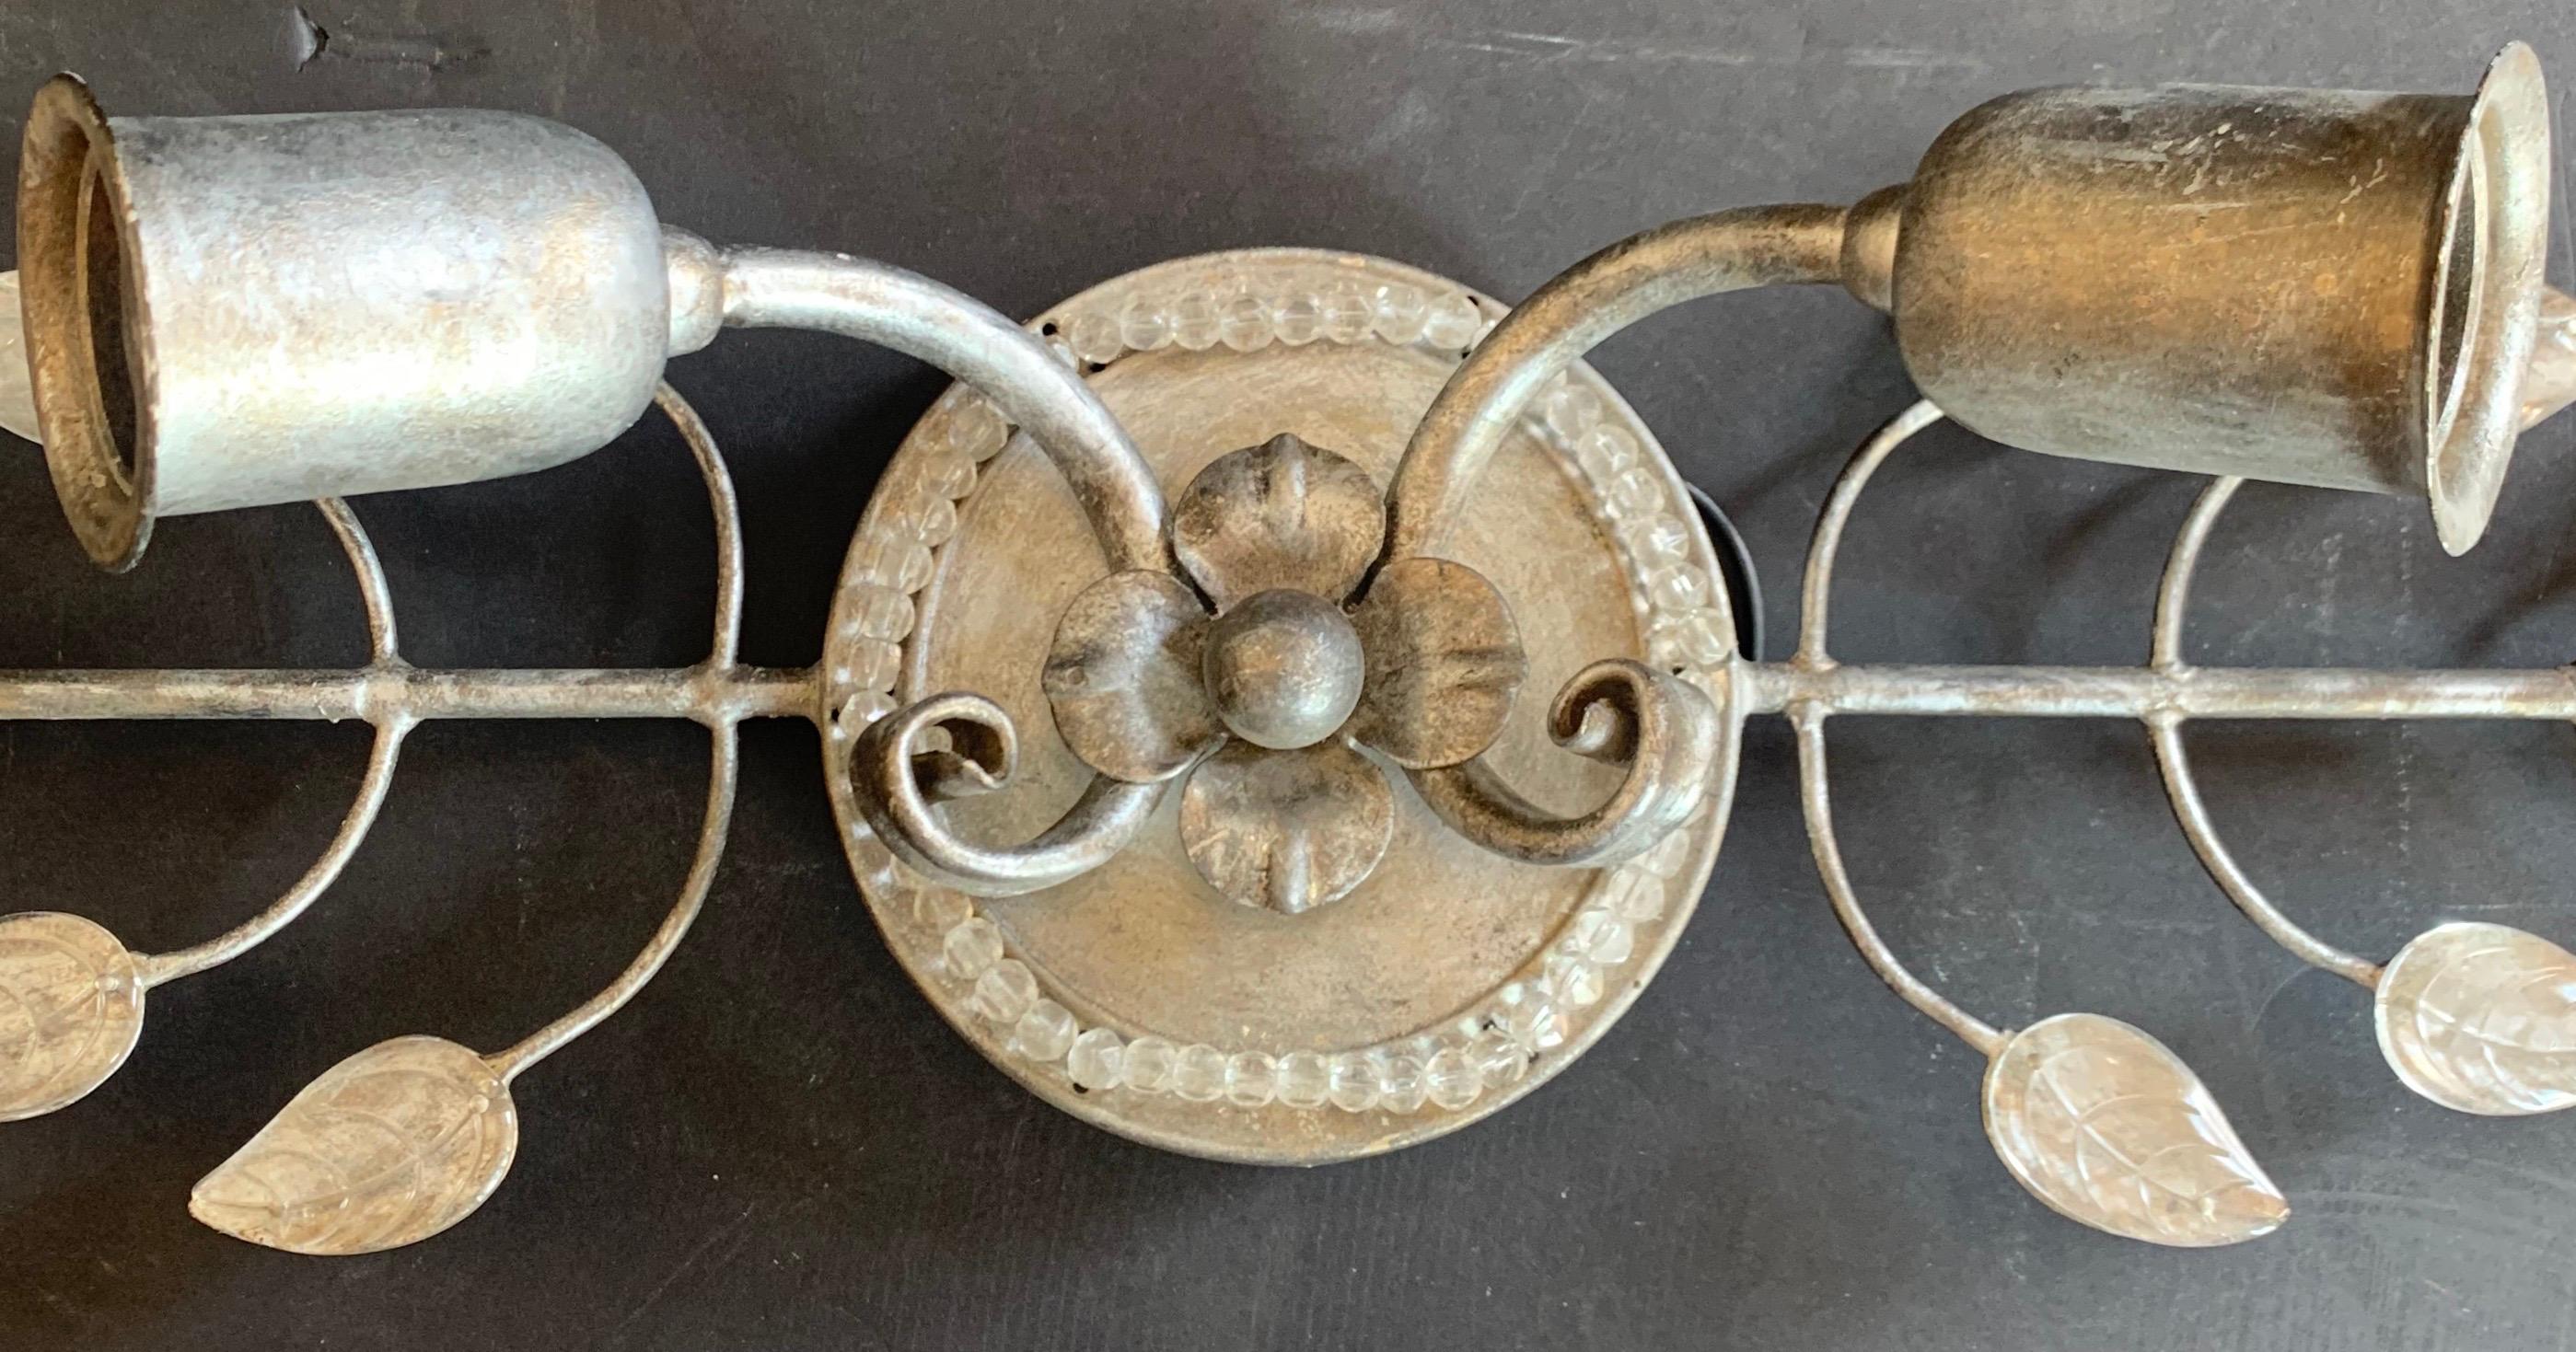 A wonderful Baguès style leaf form over vanity mirror sconce wall light fixture with beading. Completely rewired with new socket can be used for bathrooms / wet areas, comes ready to install and enjoy with mounting brackets.